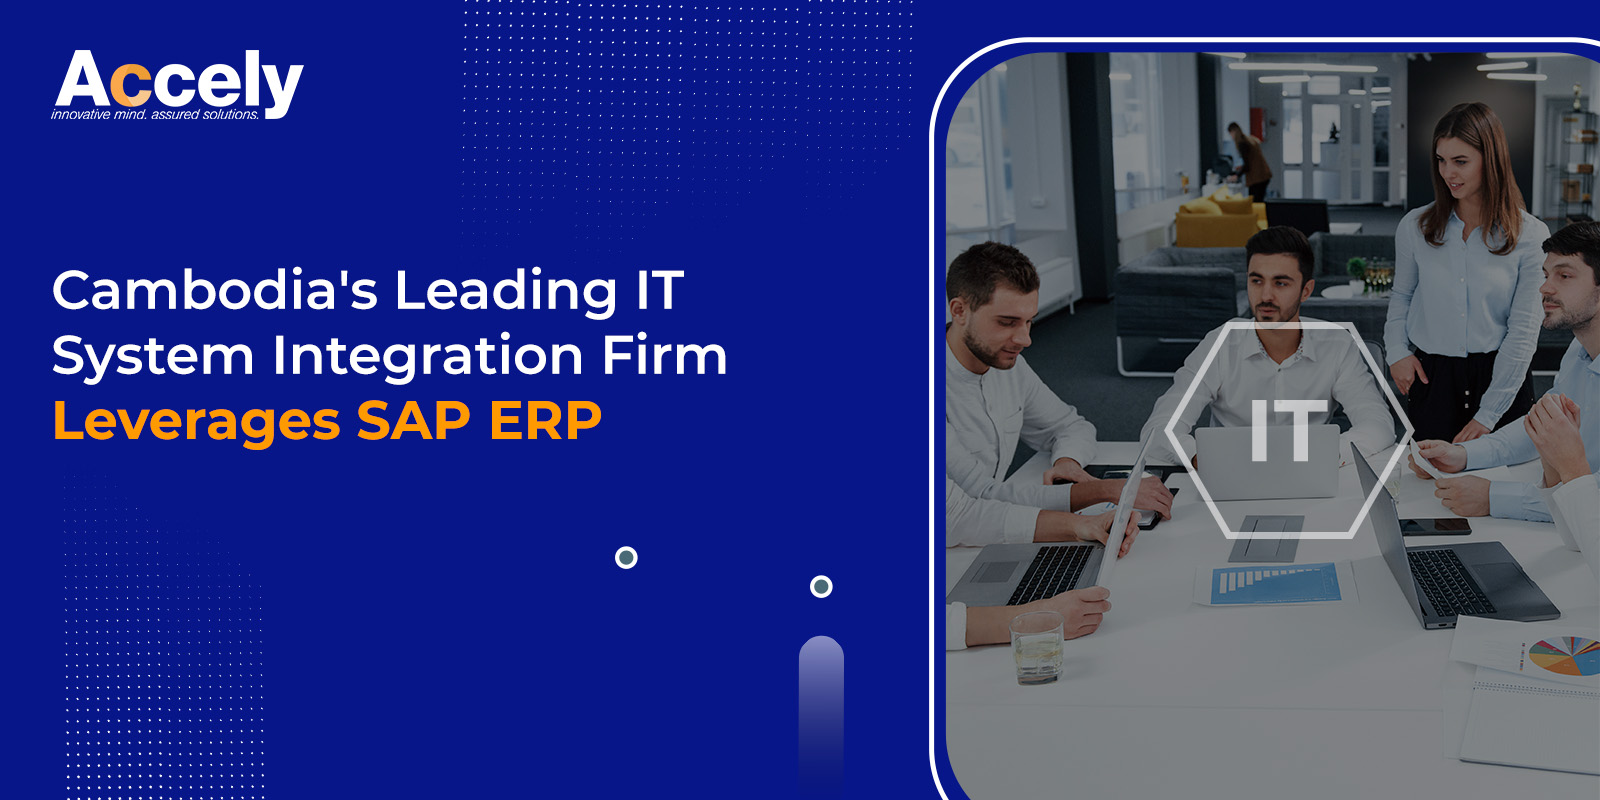 Cambodia's Leading IT System Integration Firm Leverages SAP ERP